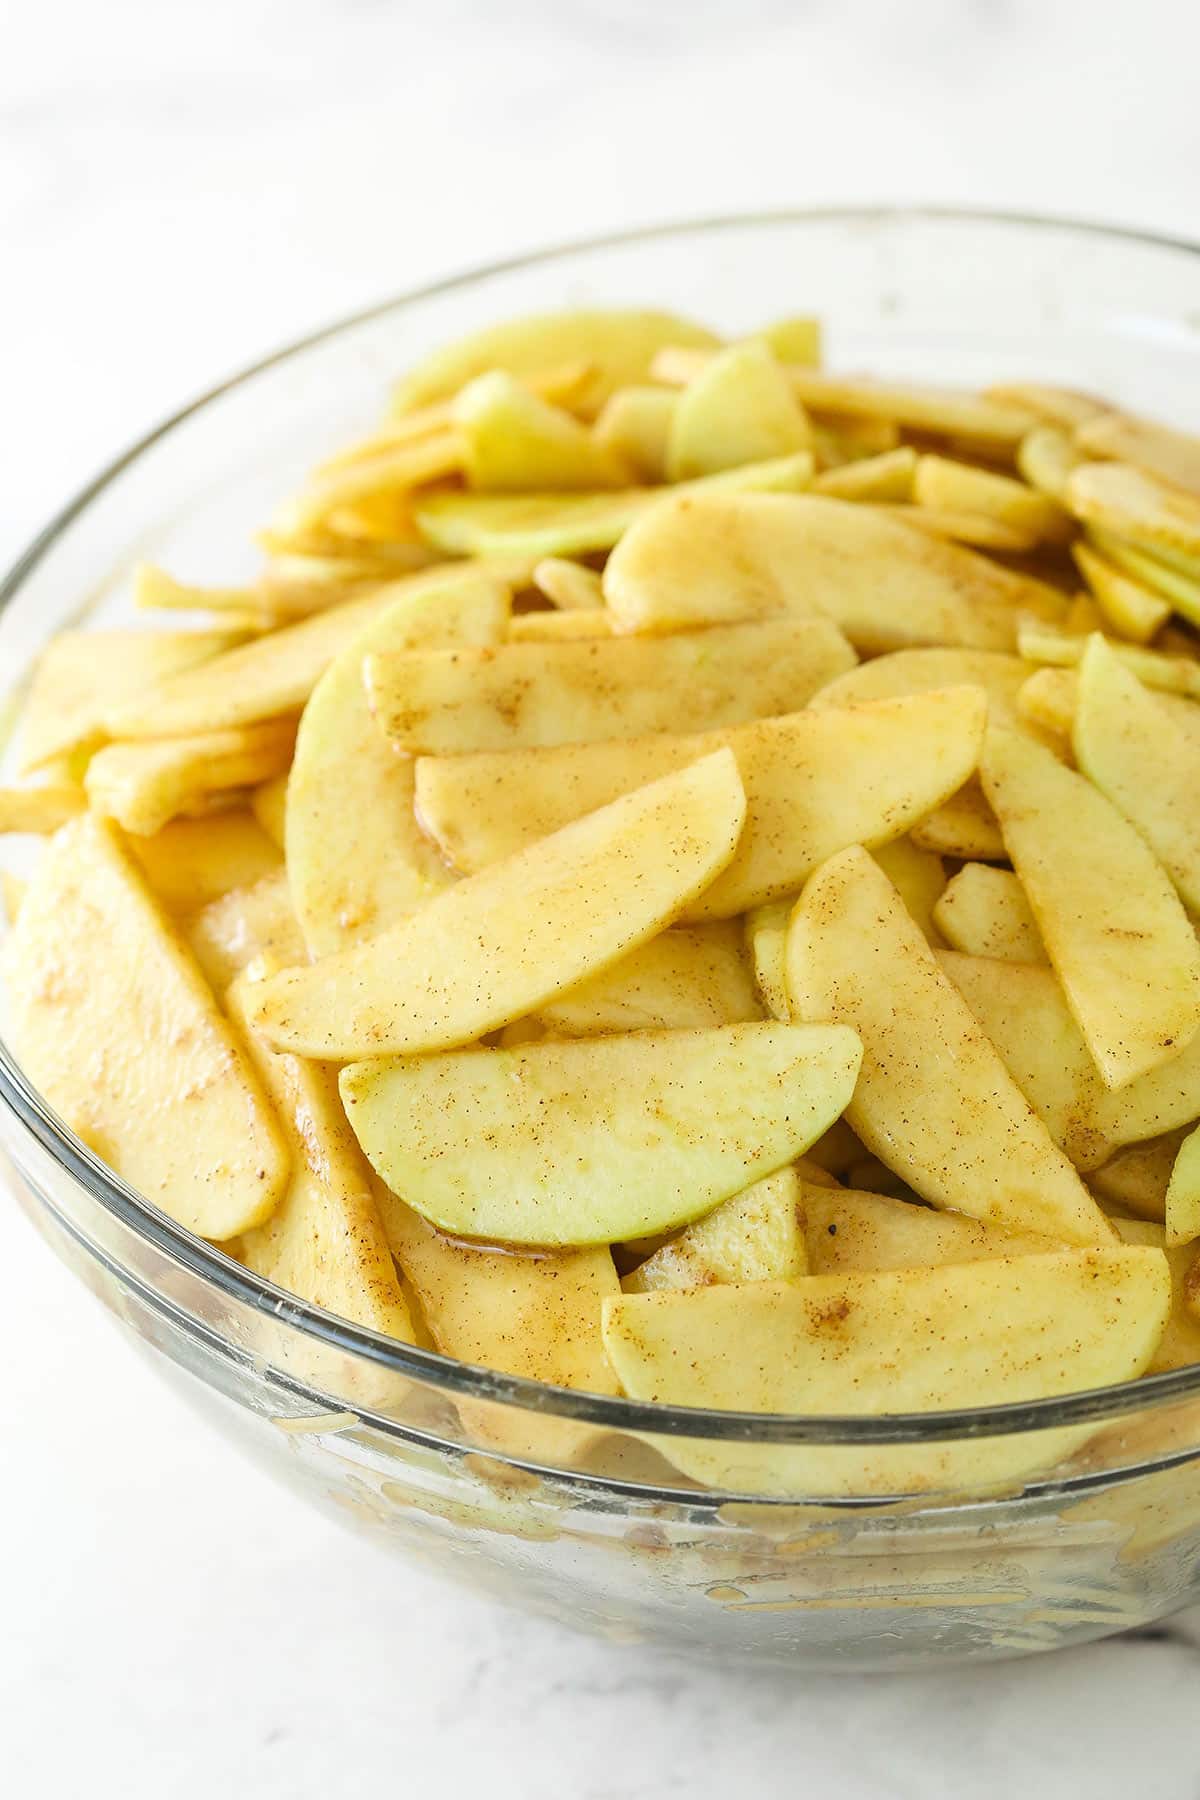 Cut apple slices coated in spices and lemon in a glass bowl.